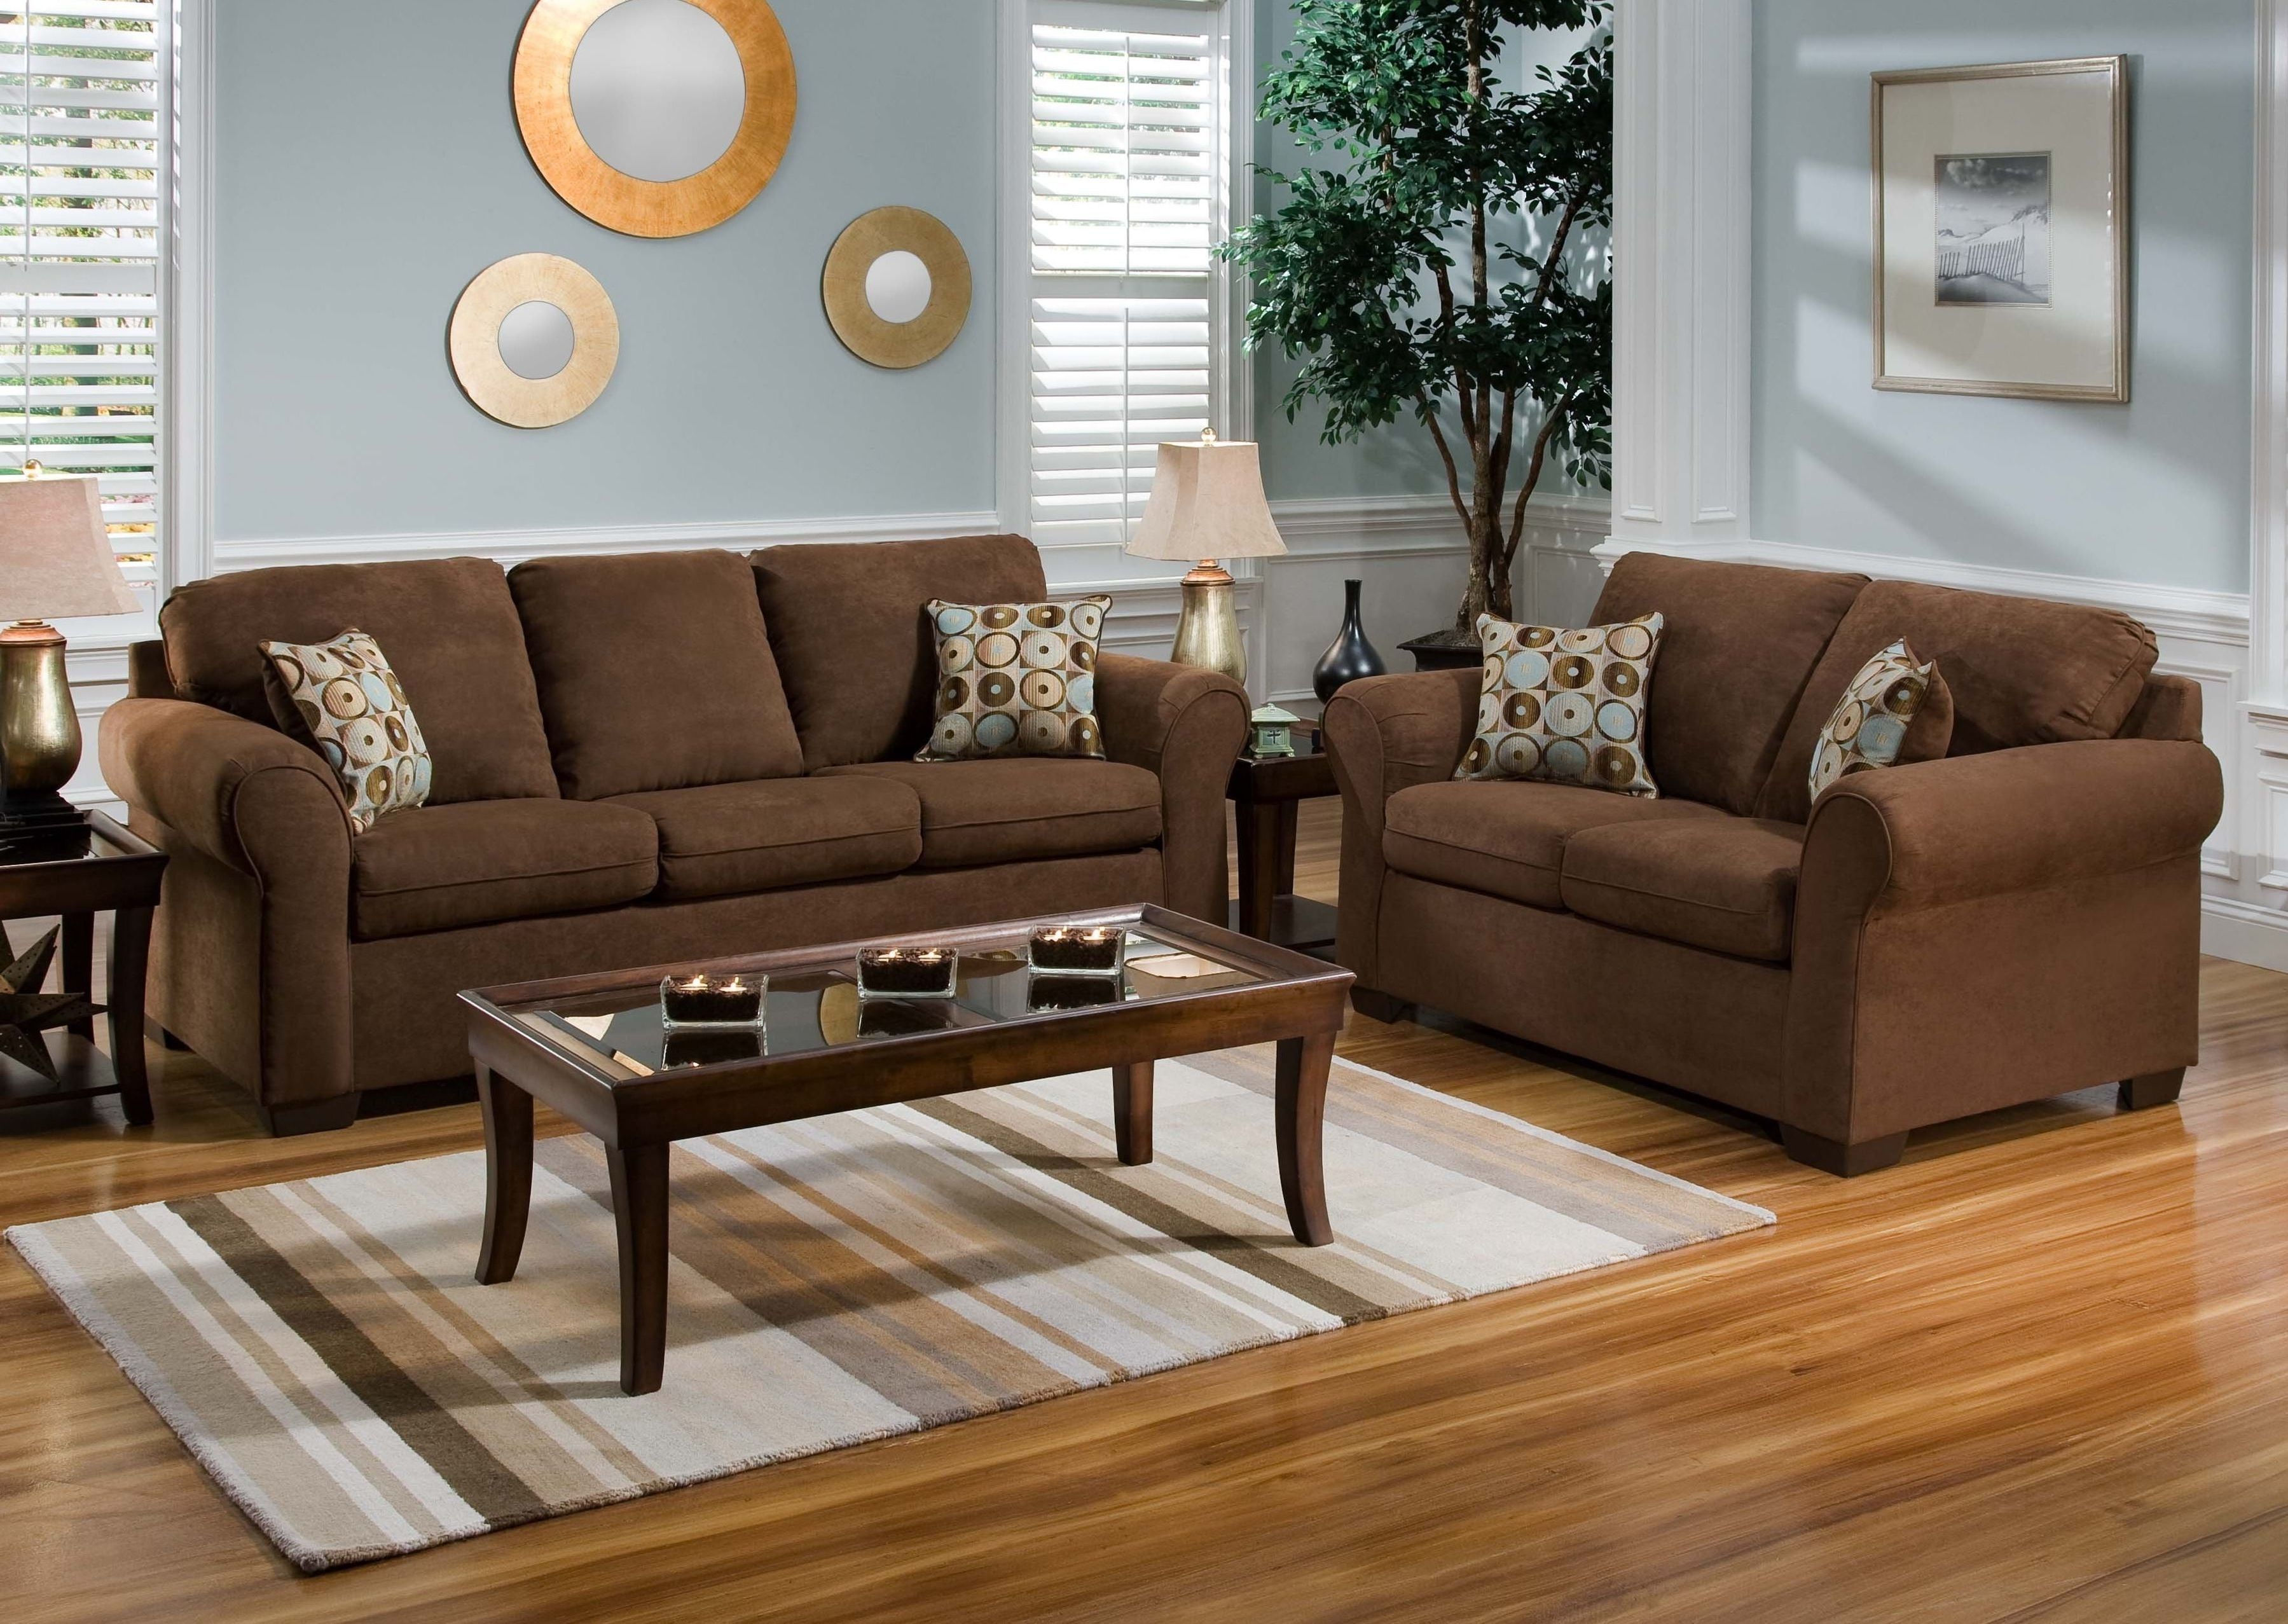 Wall Colors For Living Room With Brown Couch